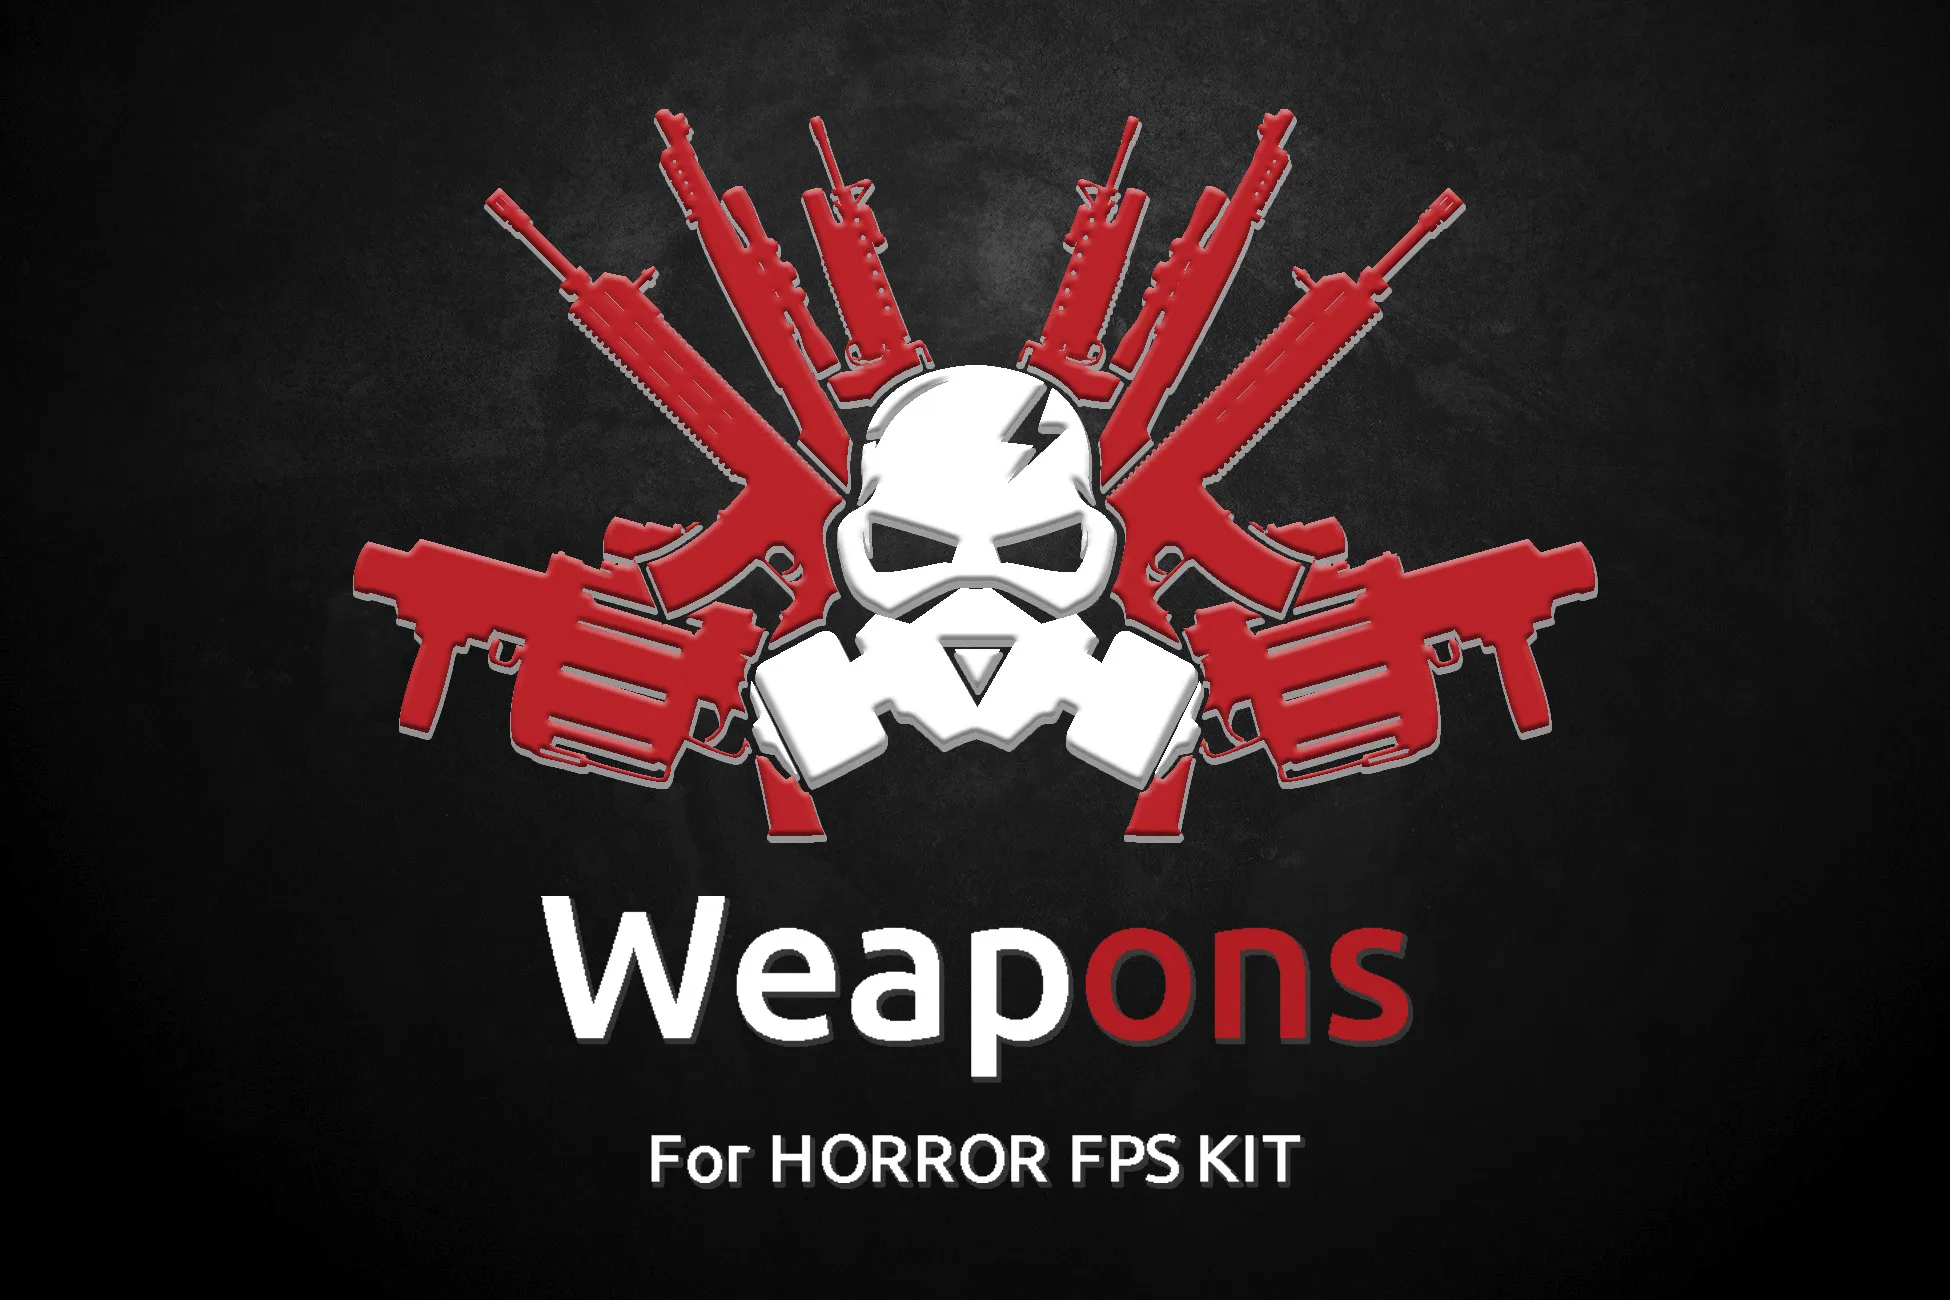 Weapons v0.1.1 Release